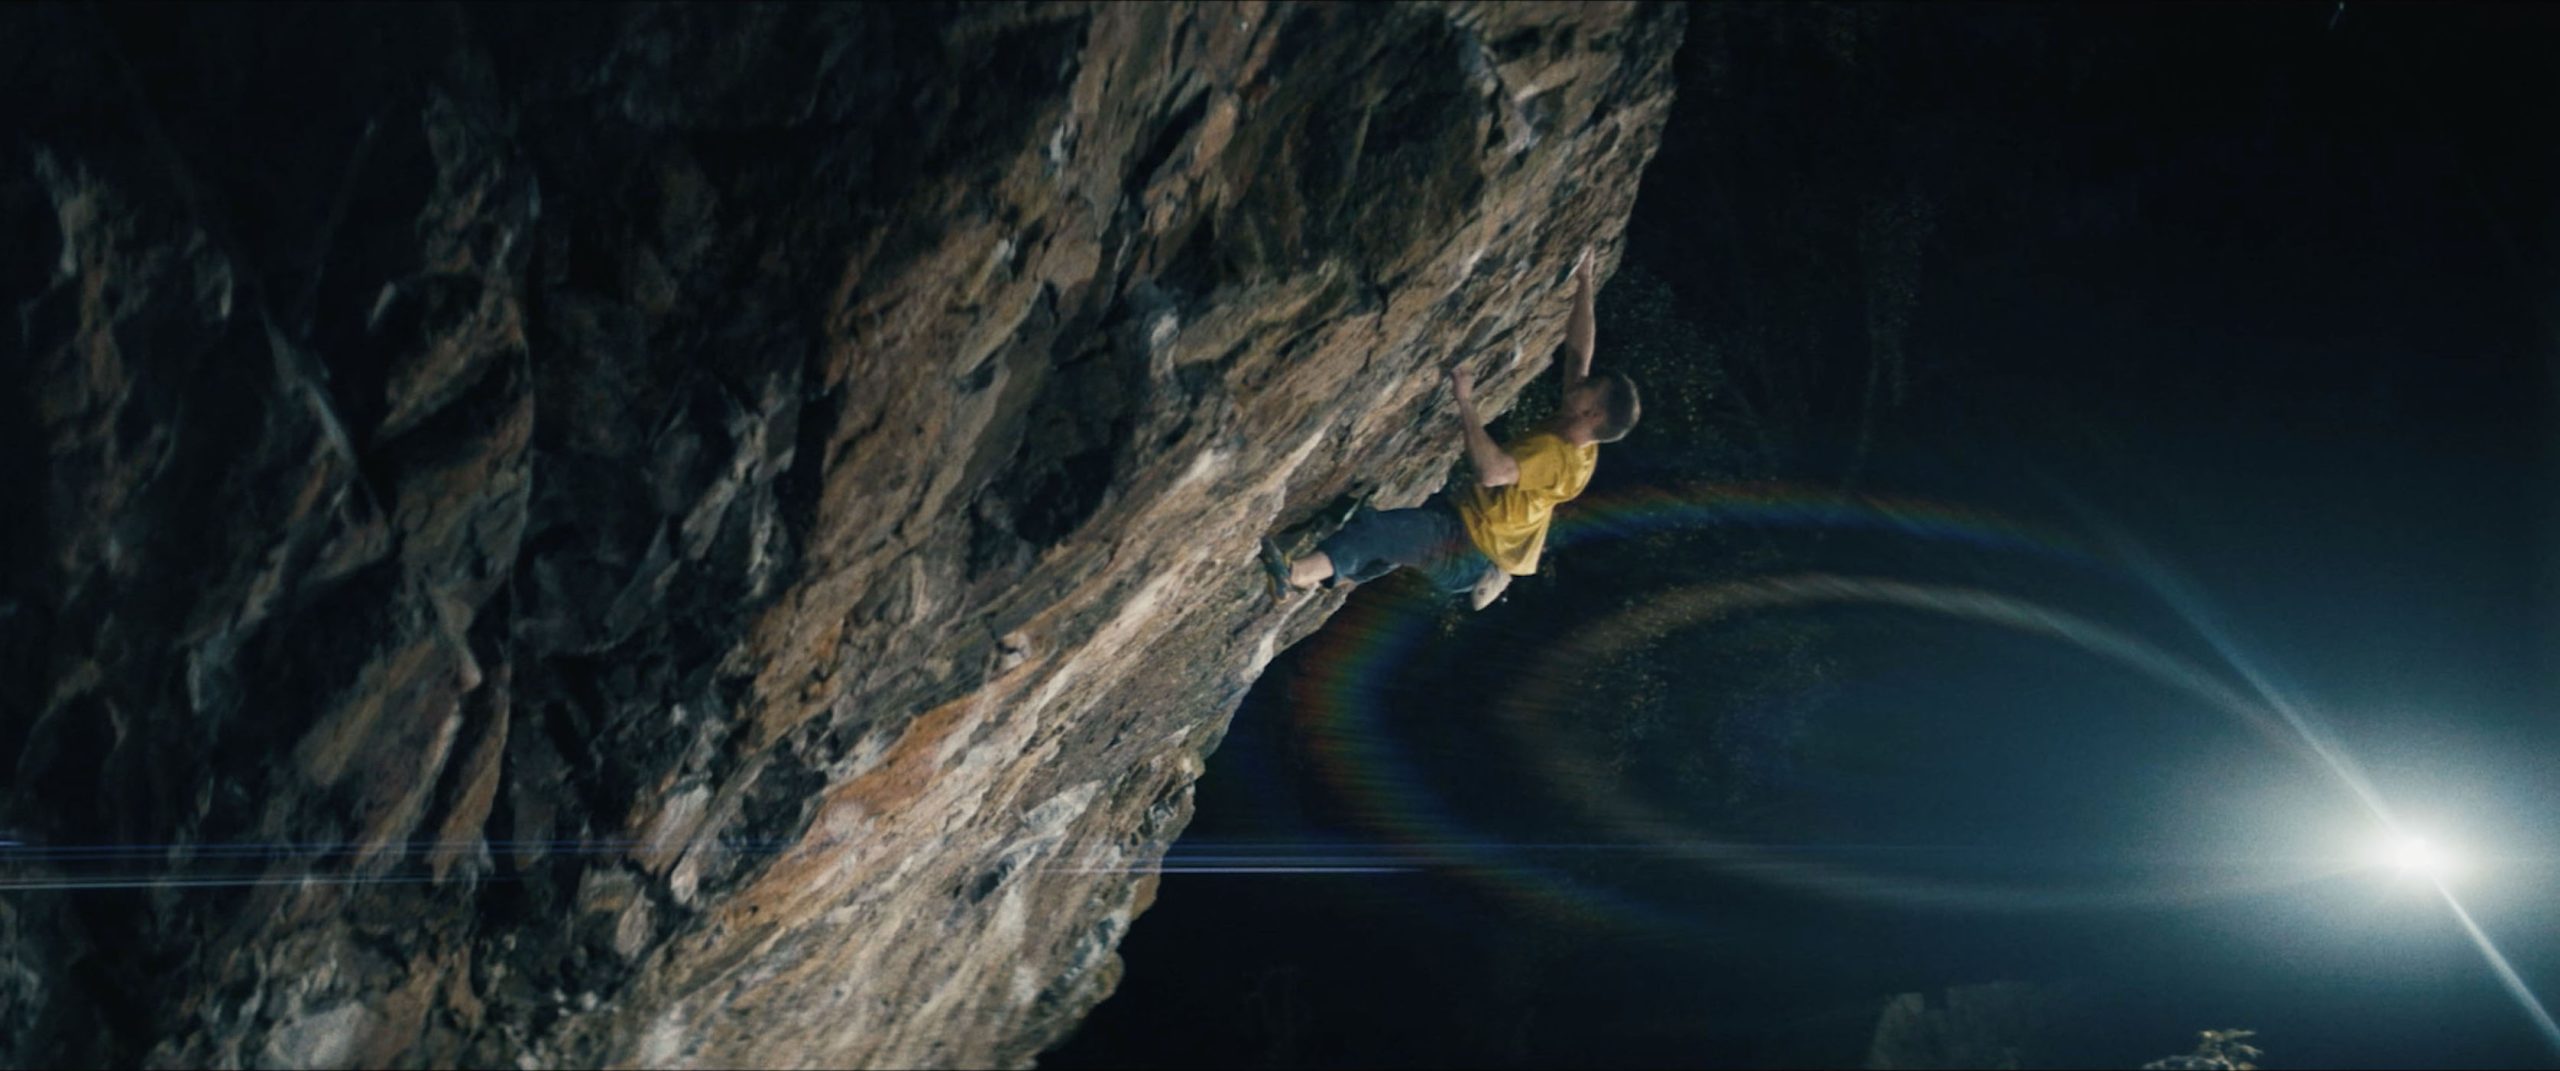 watch this awesome new bouldering film